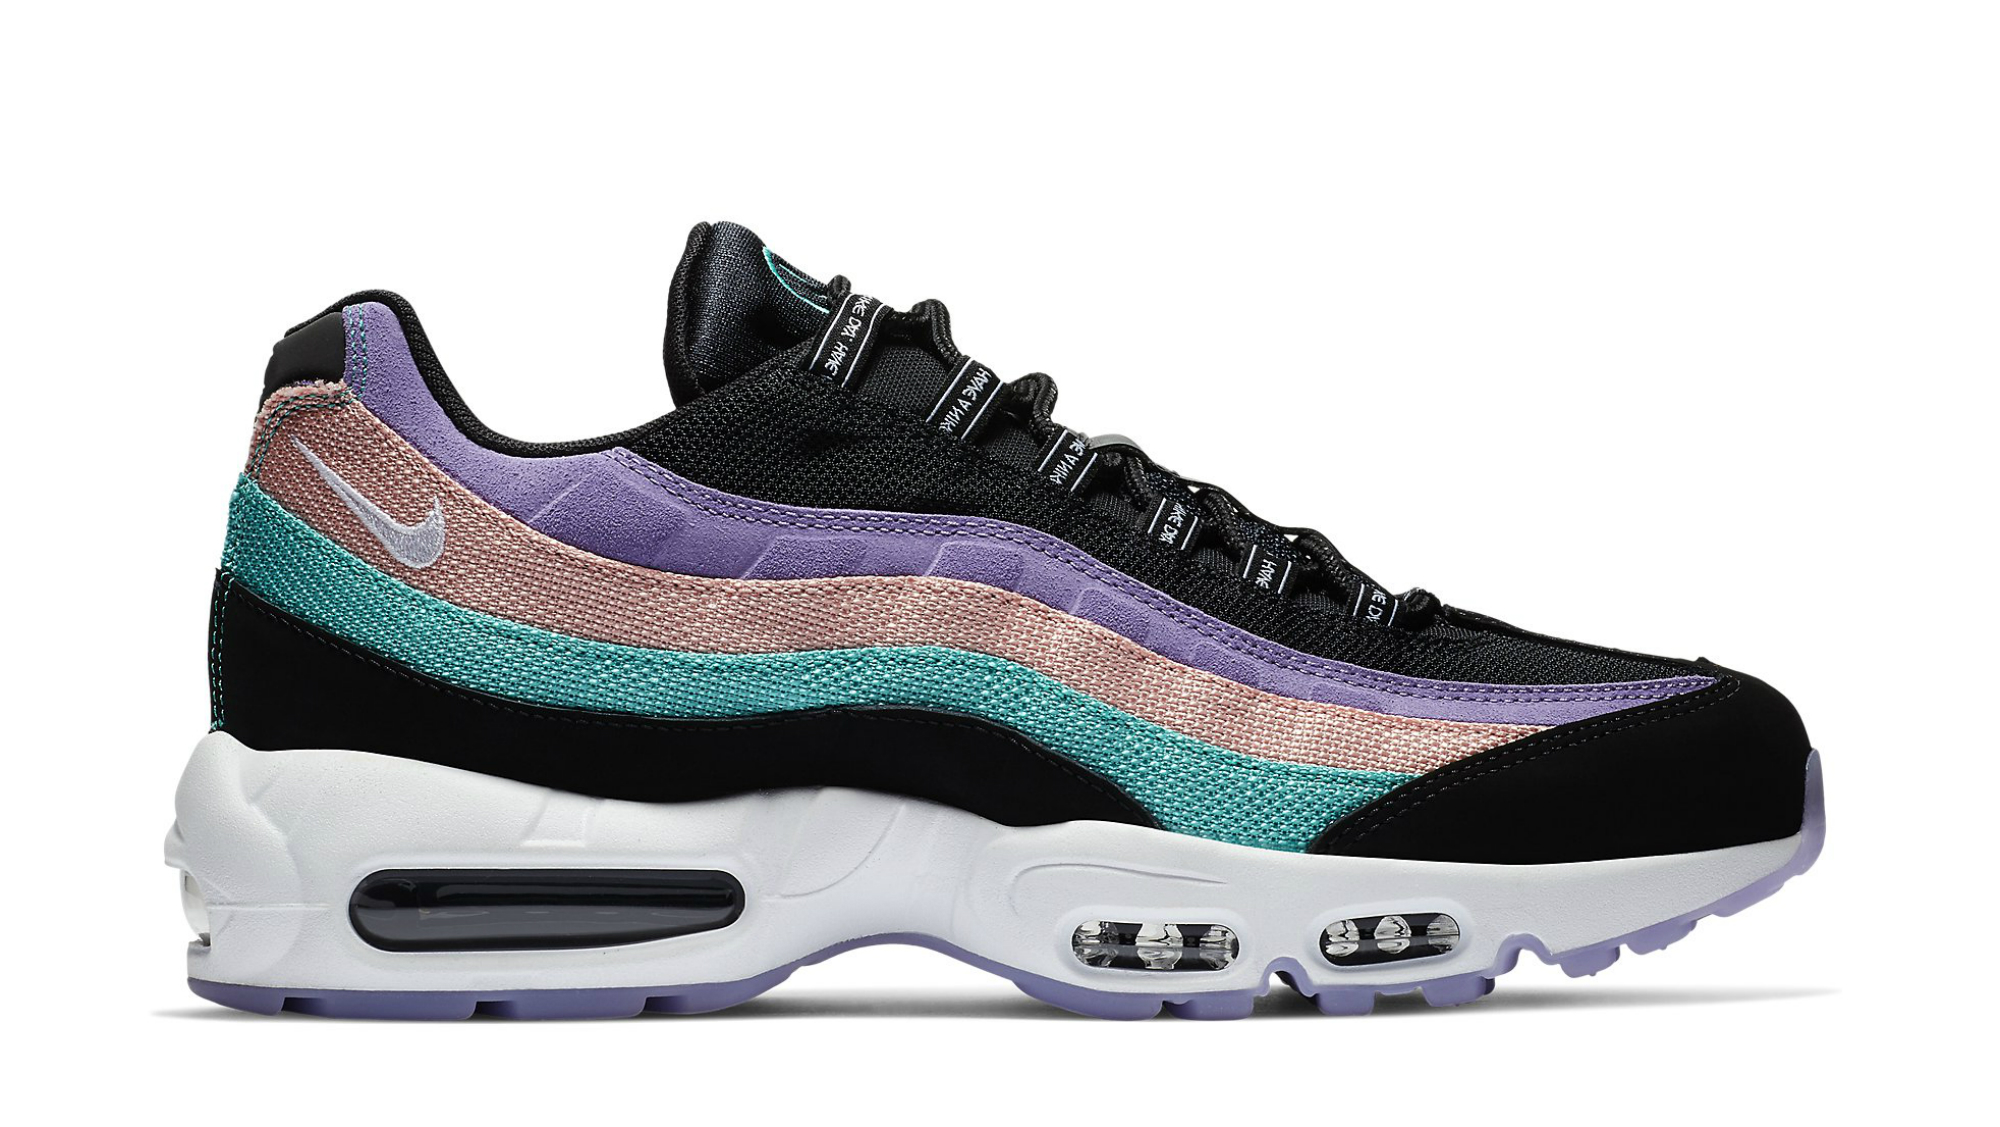 Nike Air Max 95 "Have a Nike Day" | Nike | Release Dates, Calendar, Prices